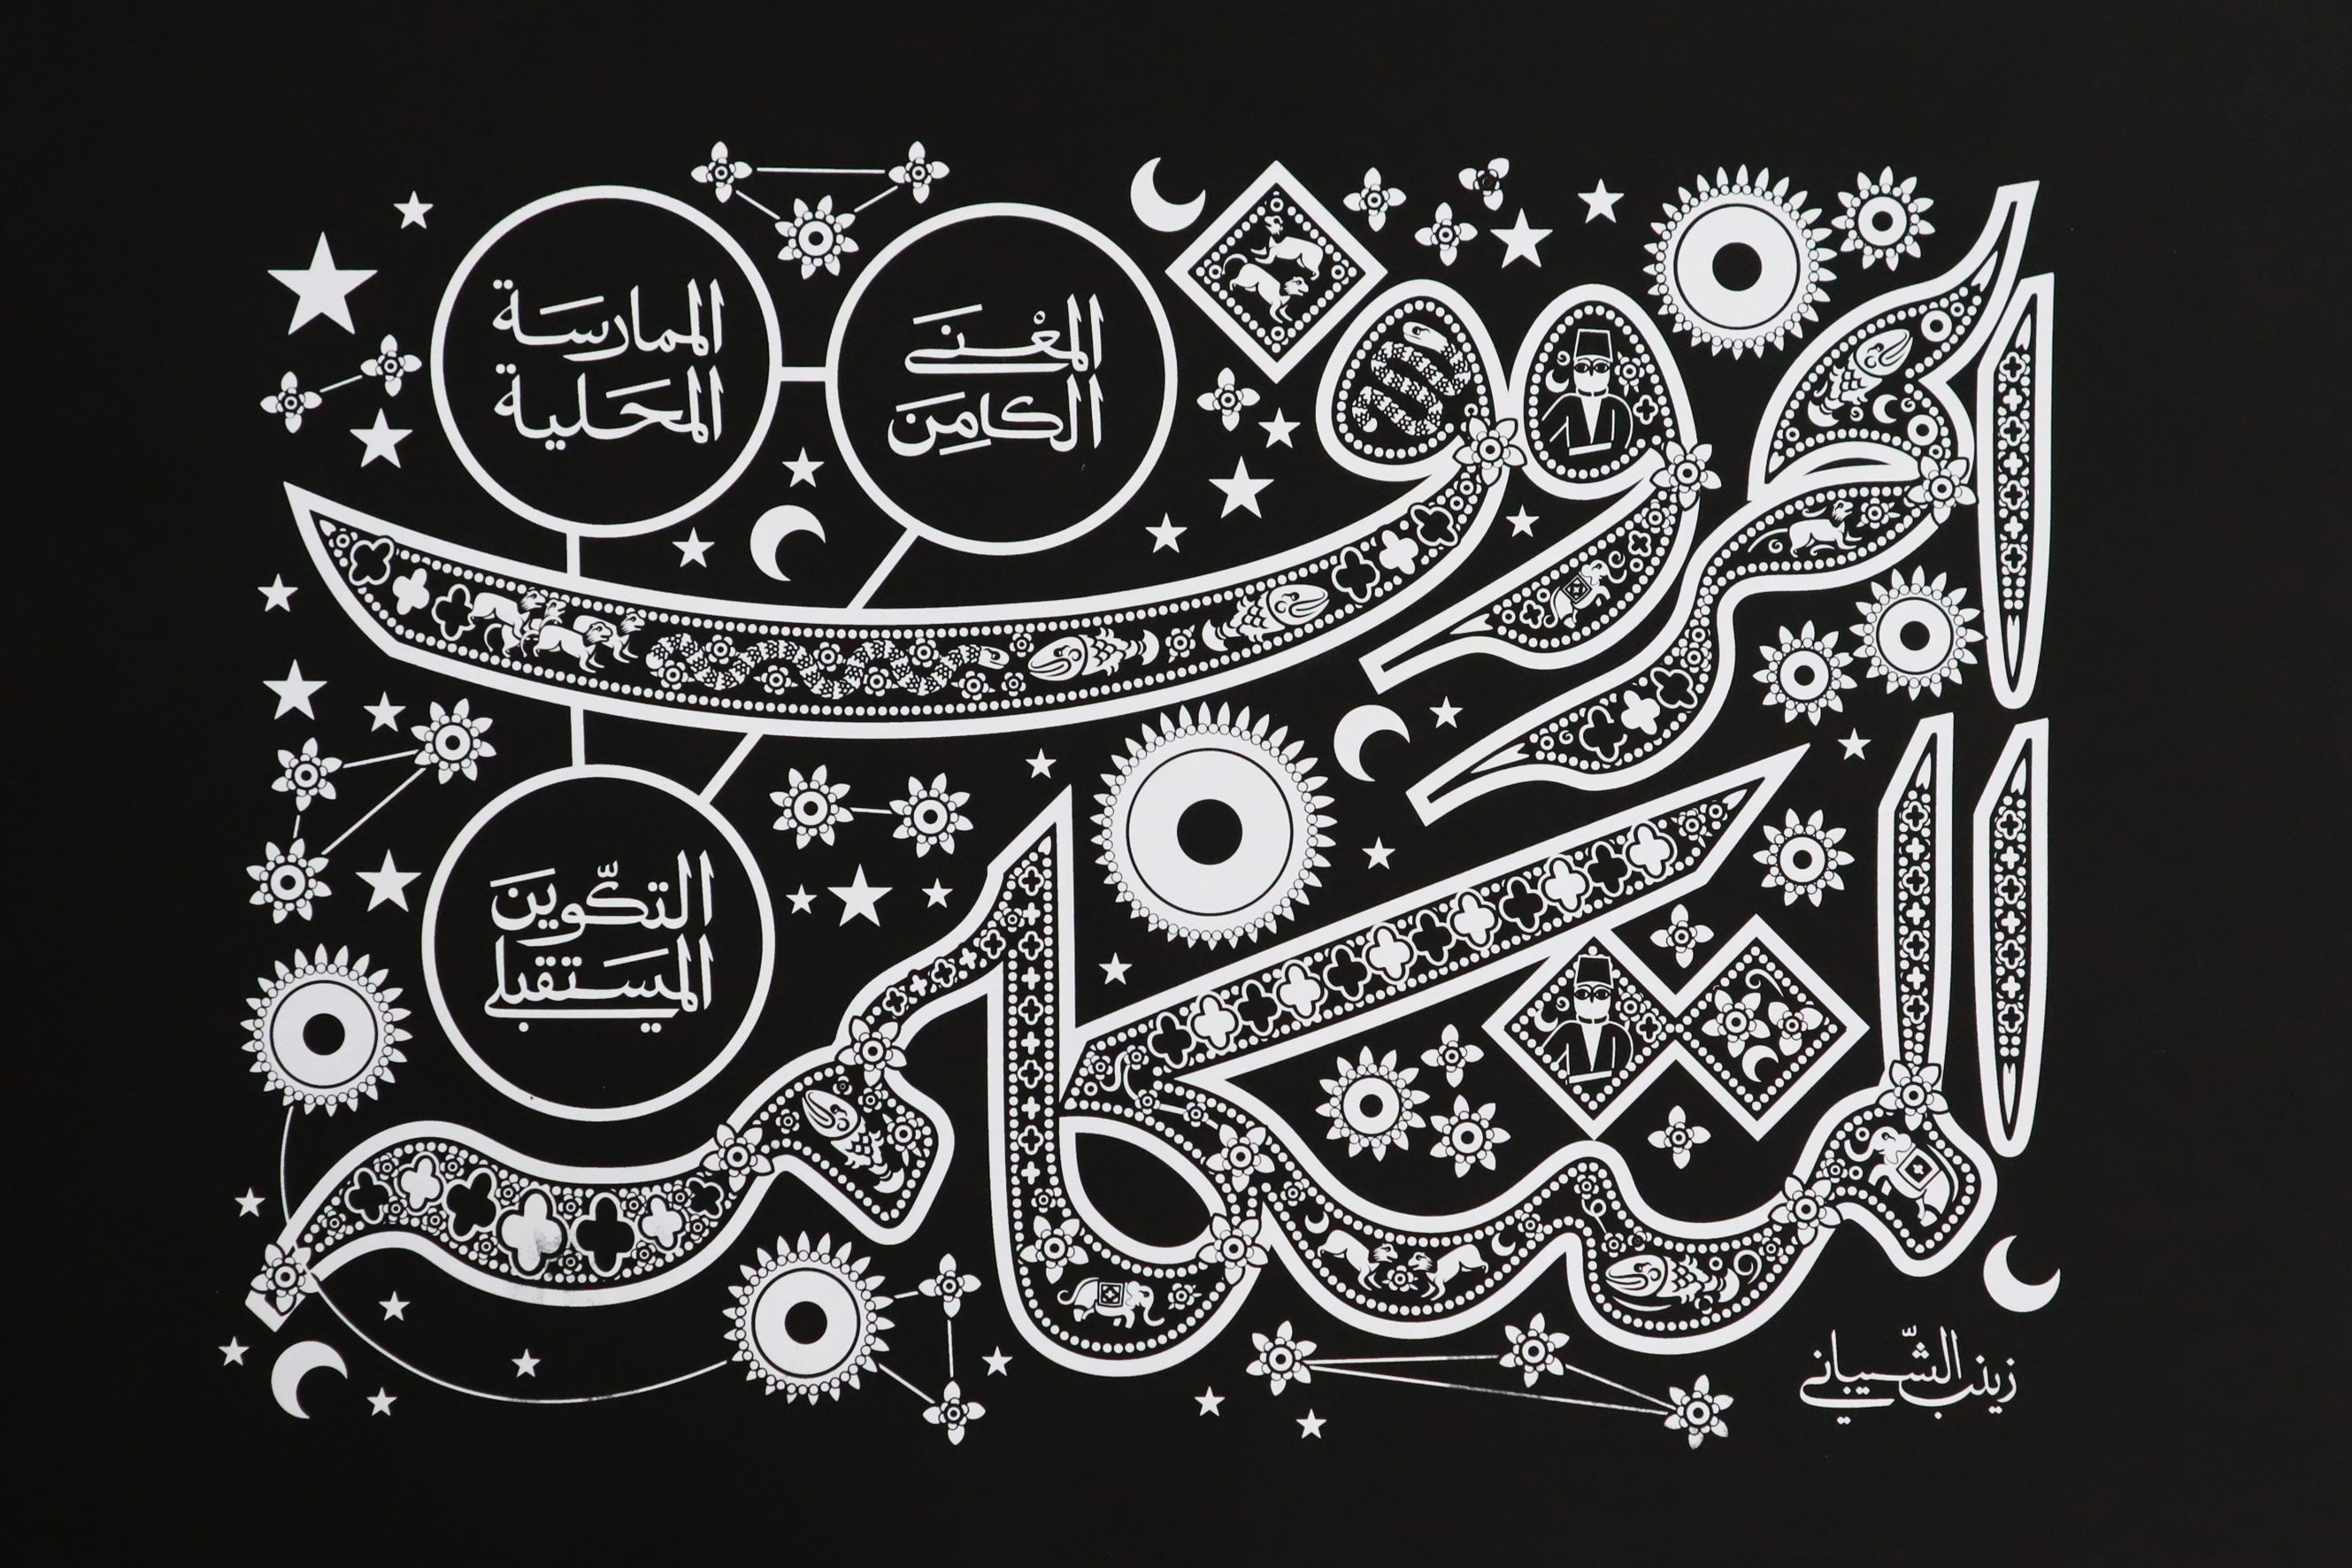 In the words of Mirza Ghalib, “every letter has a paper shirt.” The Talking Letters explores the potential outcomes of Arabic lettering through inquiries into the latent meanings, future forms, and local practices in order to create representations of the versatility and expressive nature of the script. From the Turkish prophetic tradition “trust in the waws (و)” to the mystical studies of the letters, this project aims to explore the multifaceted dimensions of the Arabic script.